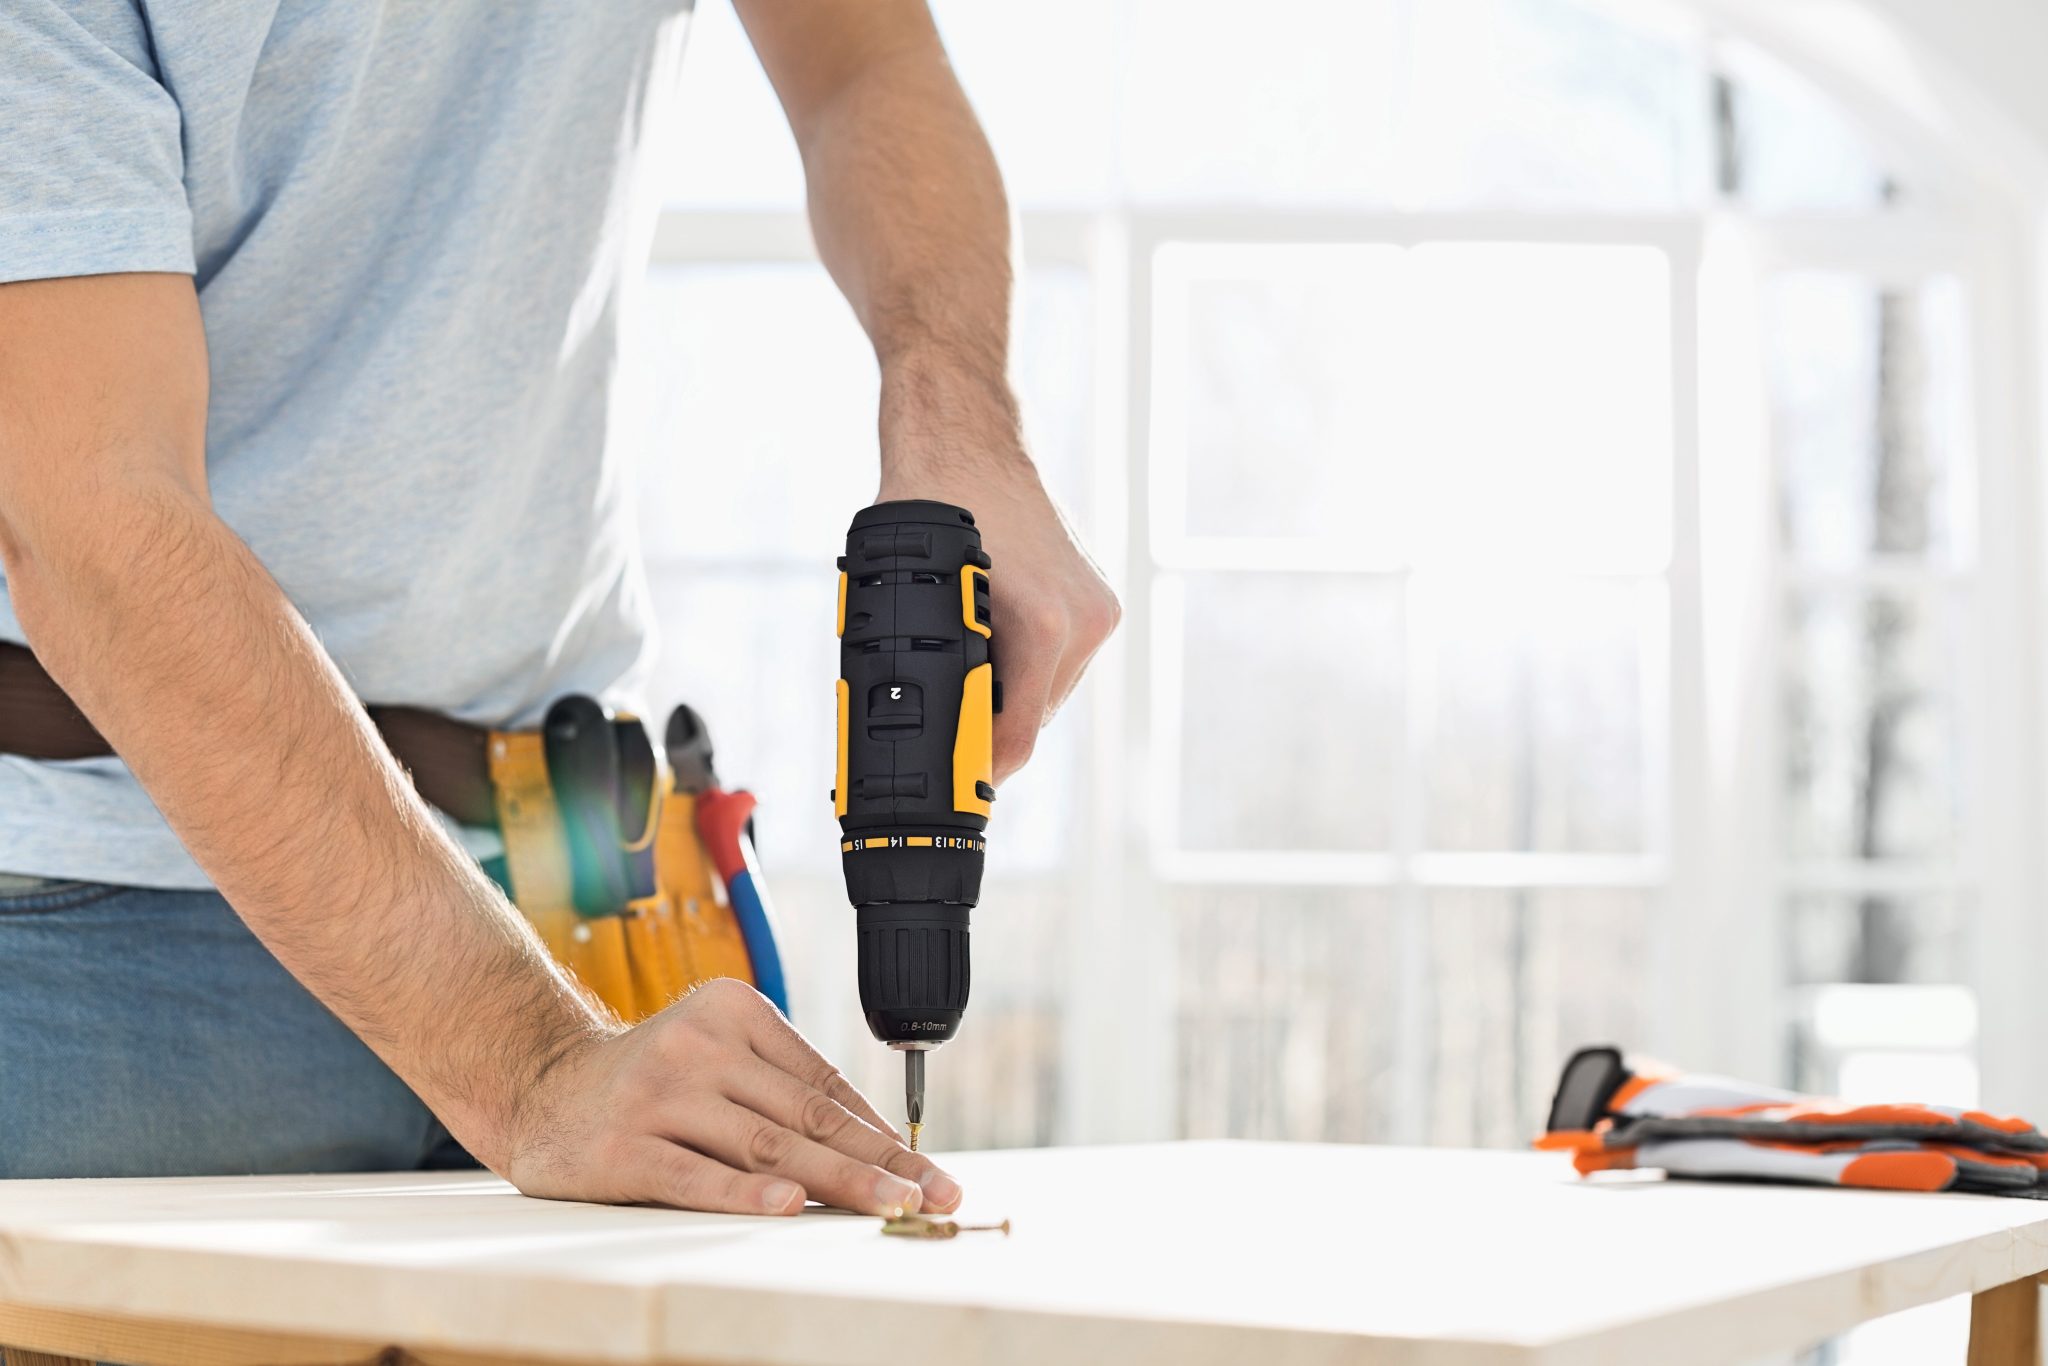 Home Improvement Projects: Make the Most of the Extra Time at Home